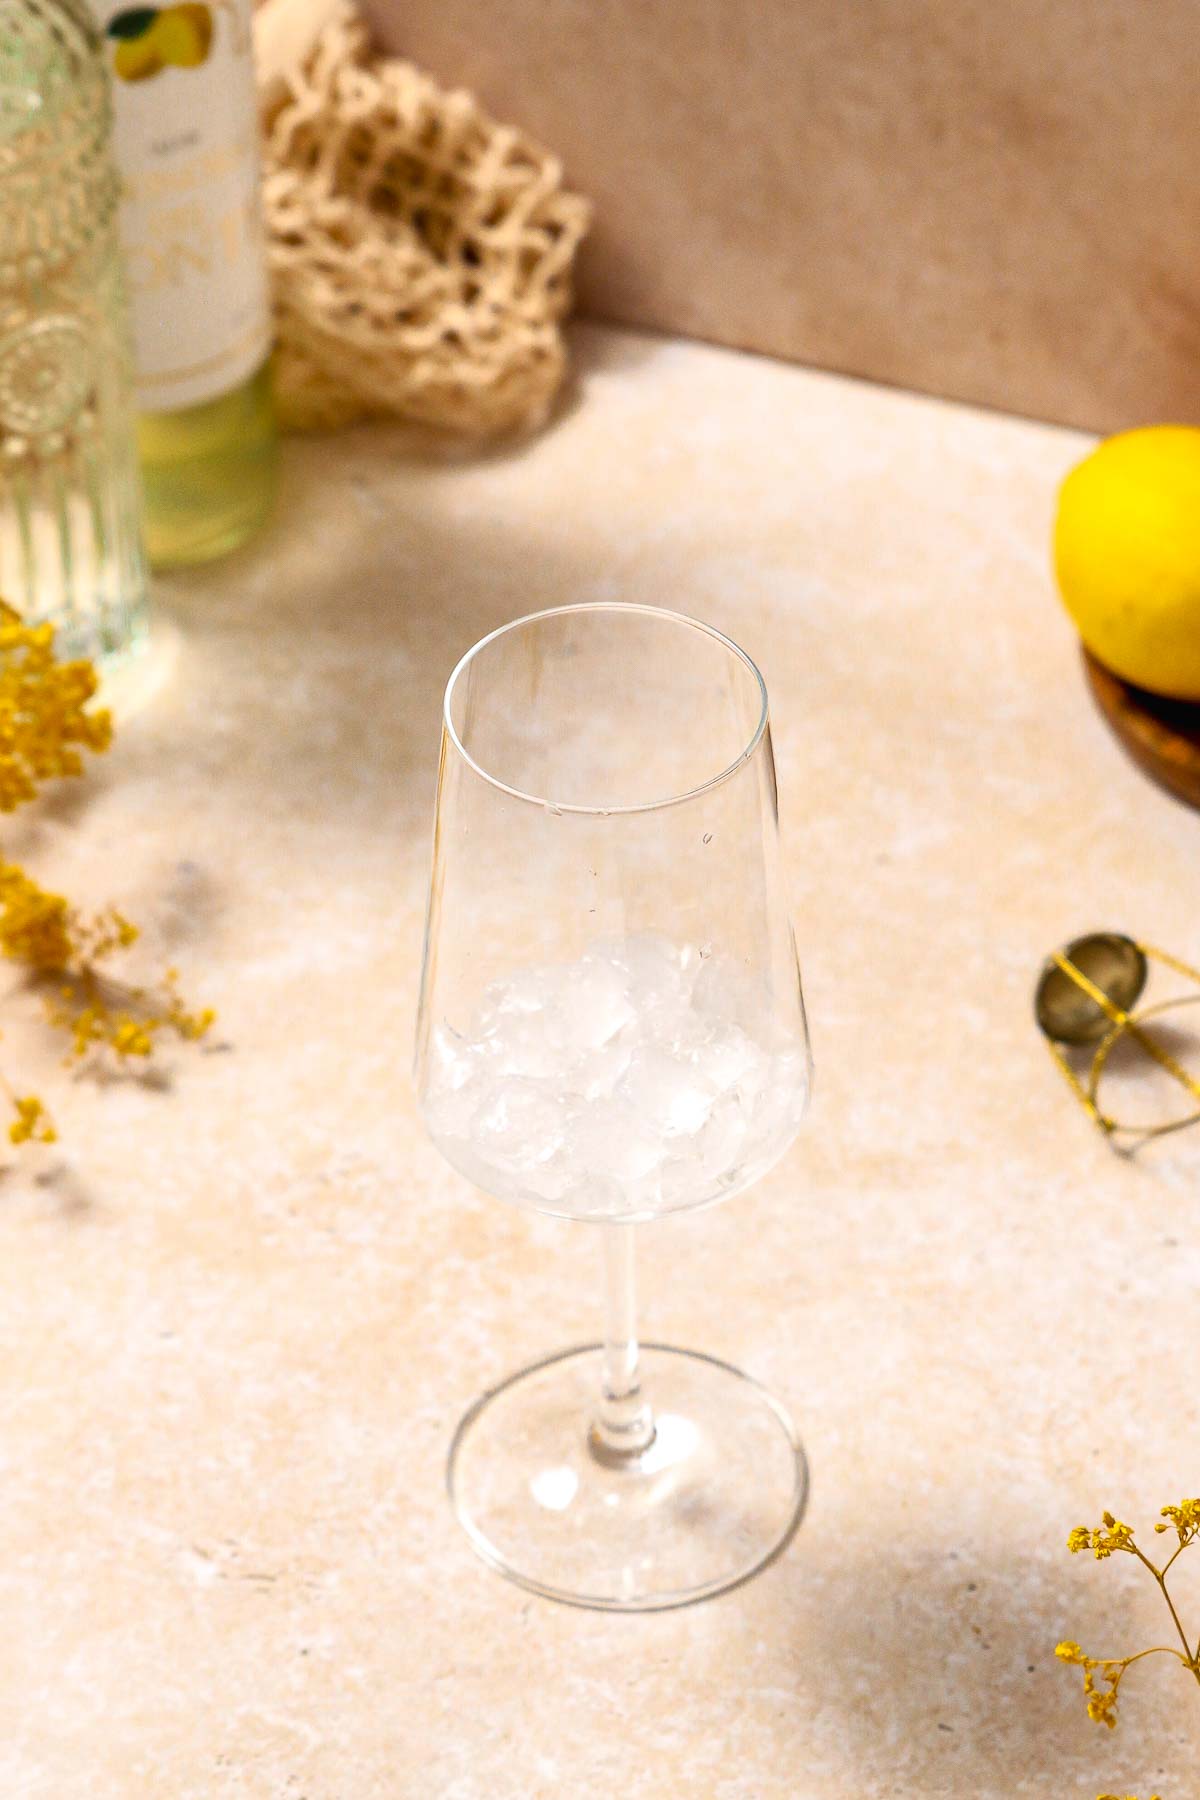 wine glass with crushed ice ready for the cocktail.